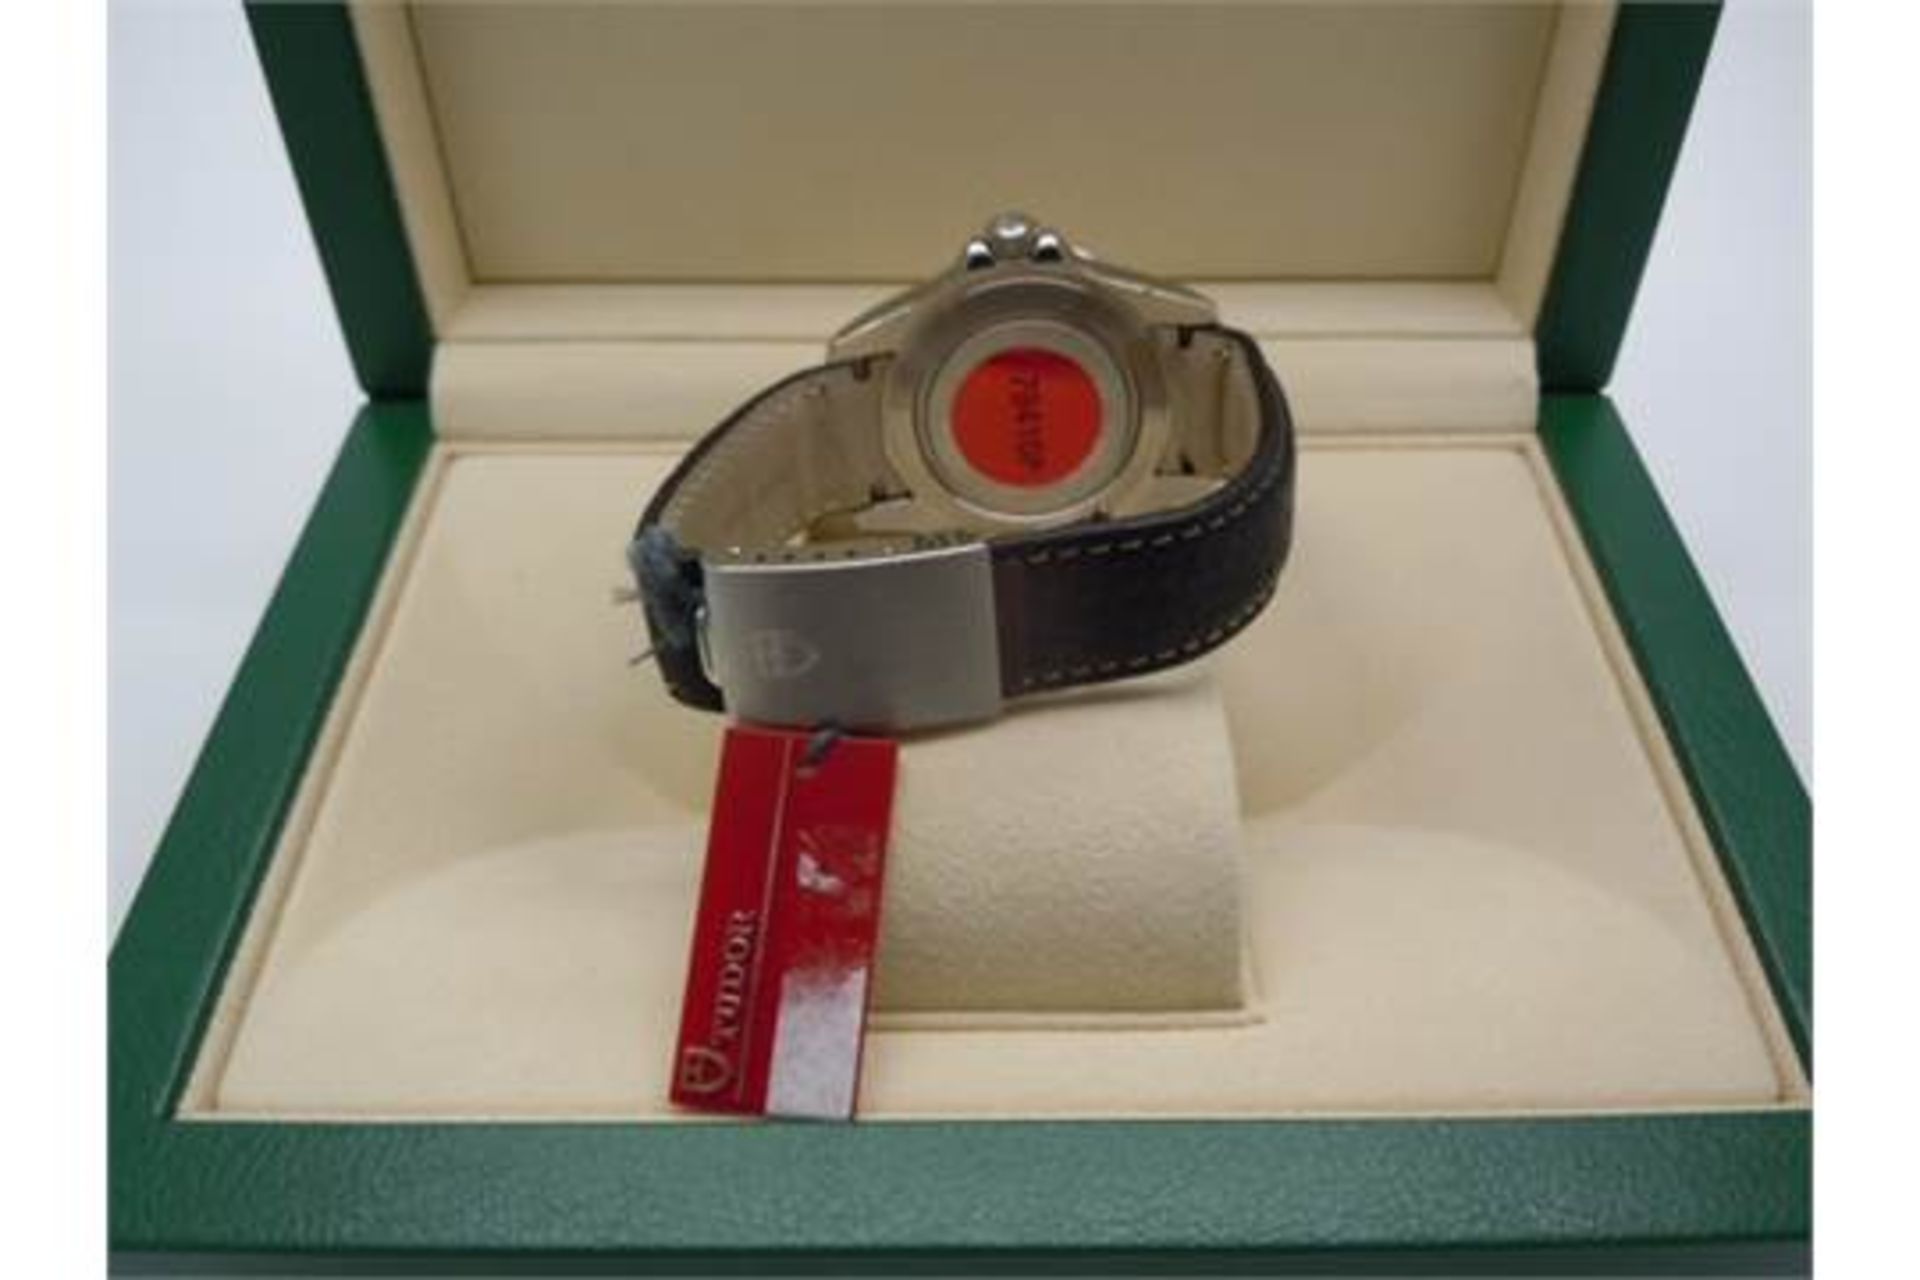 BRAND NEW OLD STOCK TUDOR PRINCE DATE ROTOR SELF WINDING WATCH STILL WITH STICKERS BOXED - Image 2 of 6